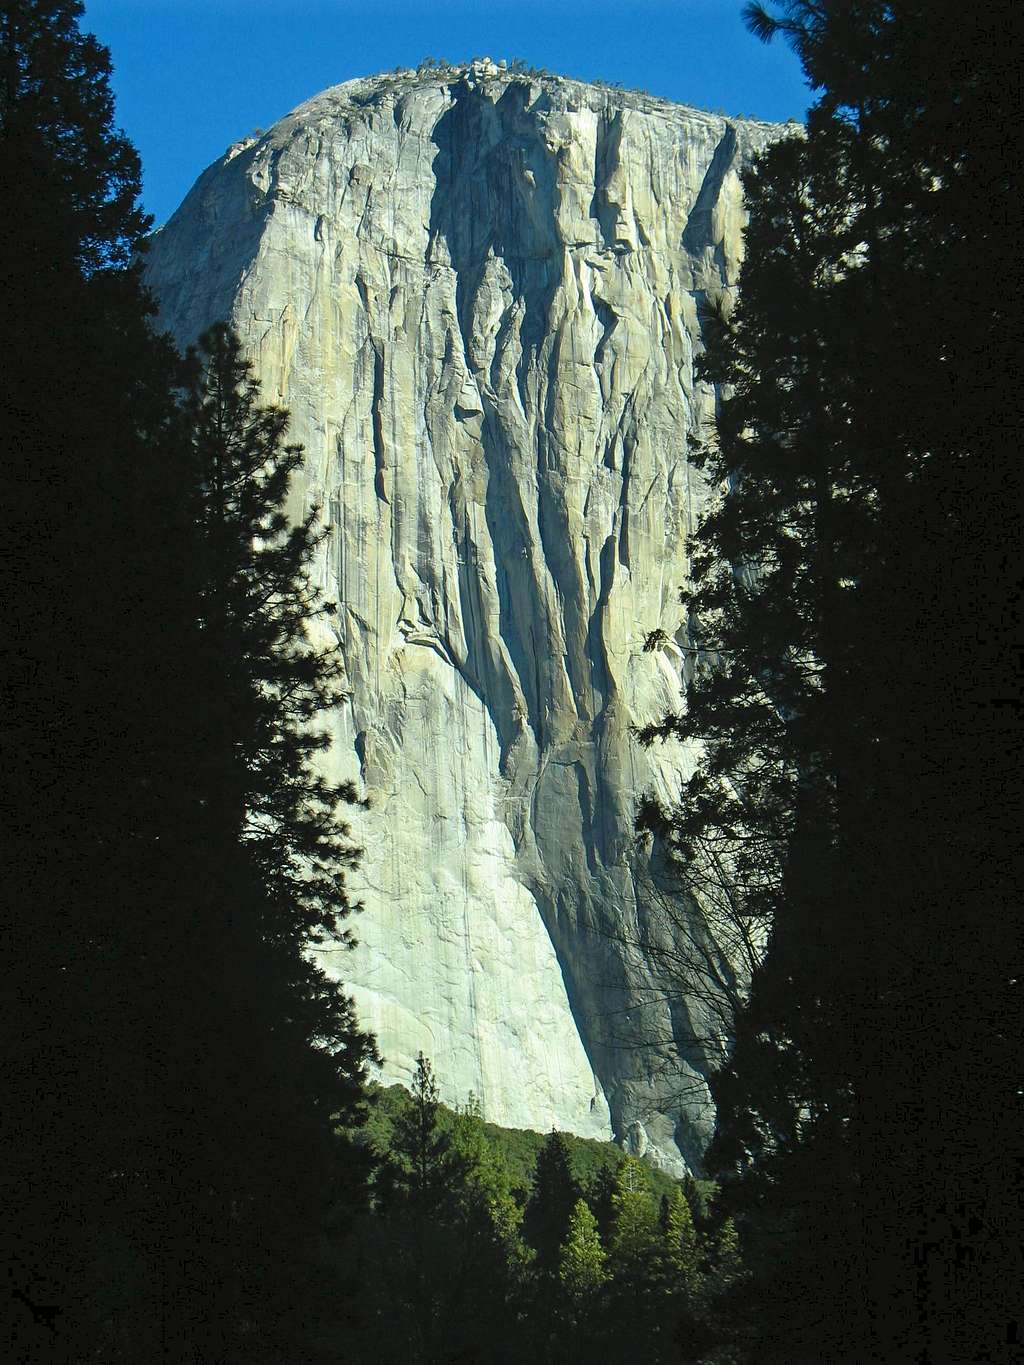 El Capitan from the south